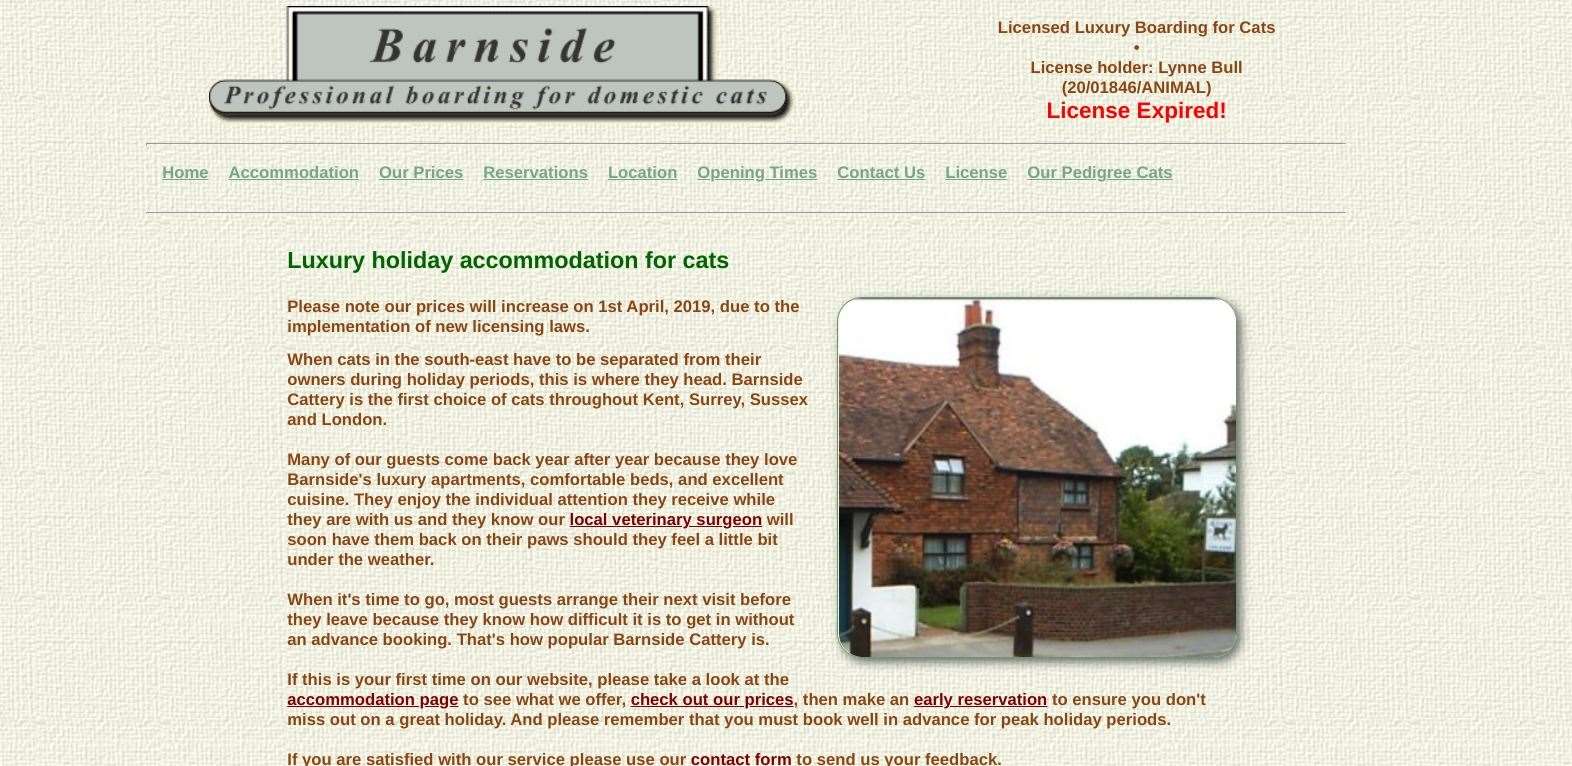 They must advertise that they do not have an online license.  Photo: Barnside Boarding Cattery